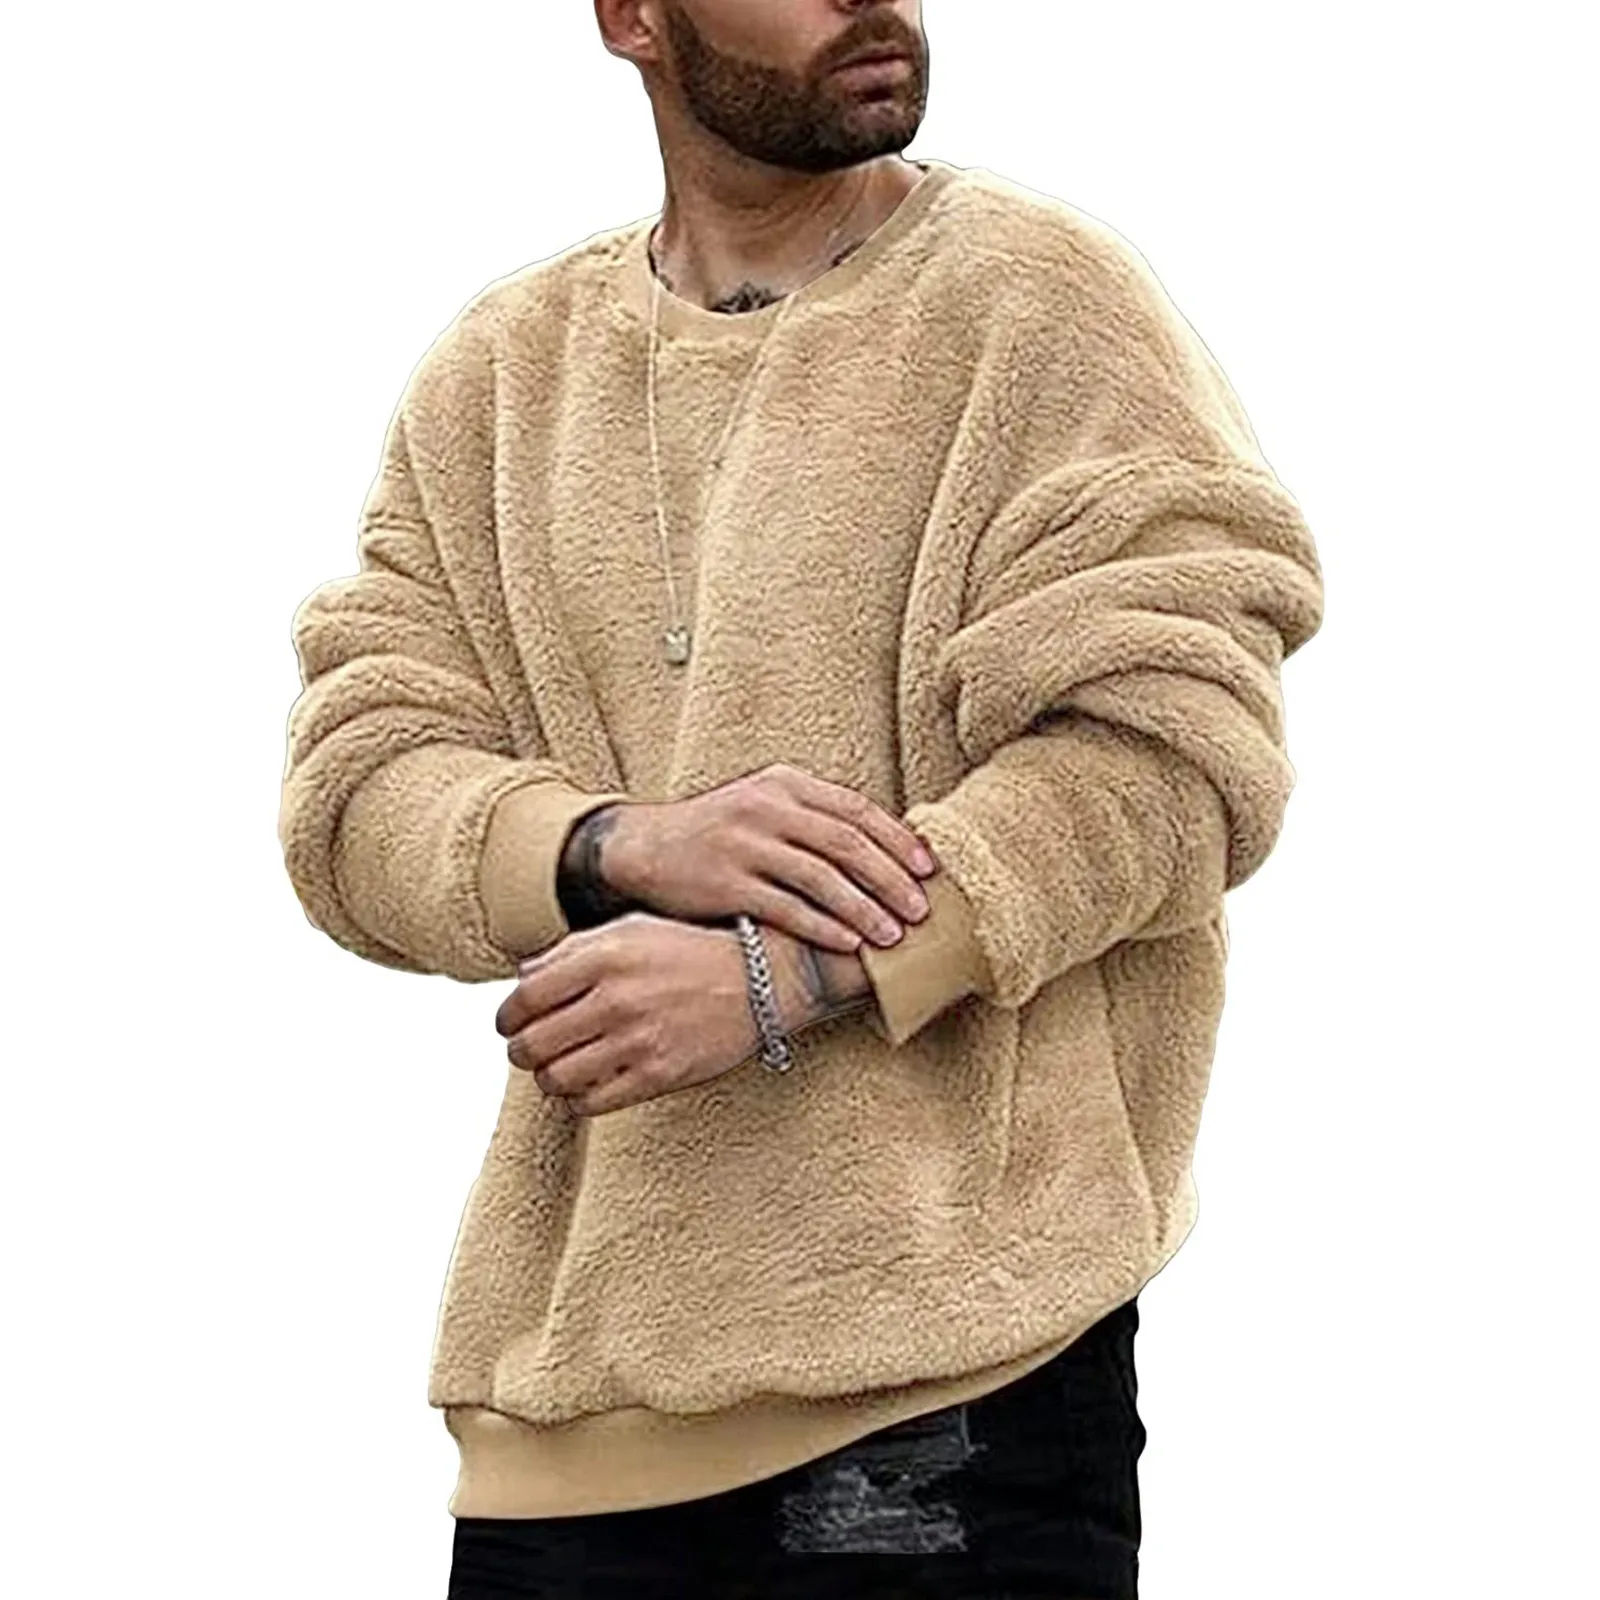 Men Fuzzy Pullover Casual Lamb Plush Thick Sweatshirt Long Sleeve Outwear Autumn Hoodies Basic Casual Pullover Vintage Clothes